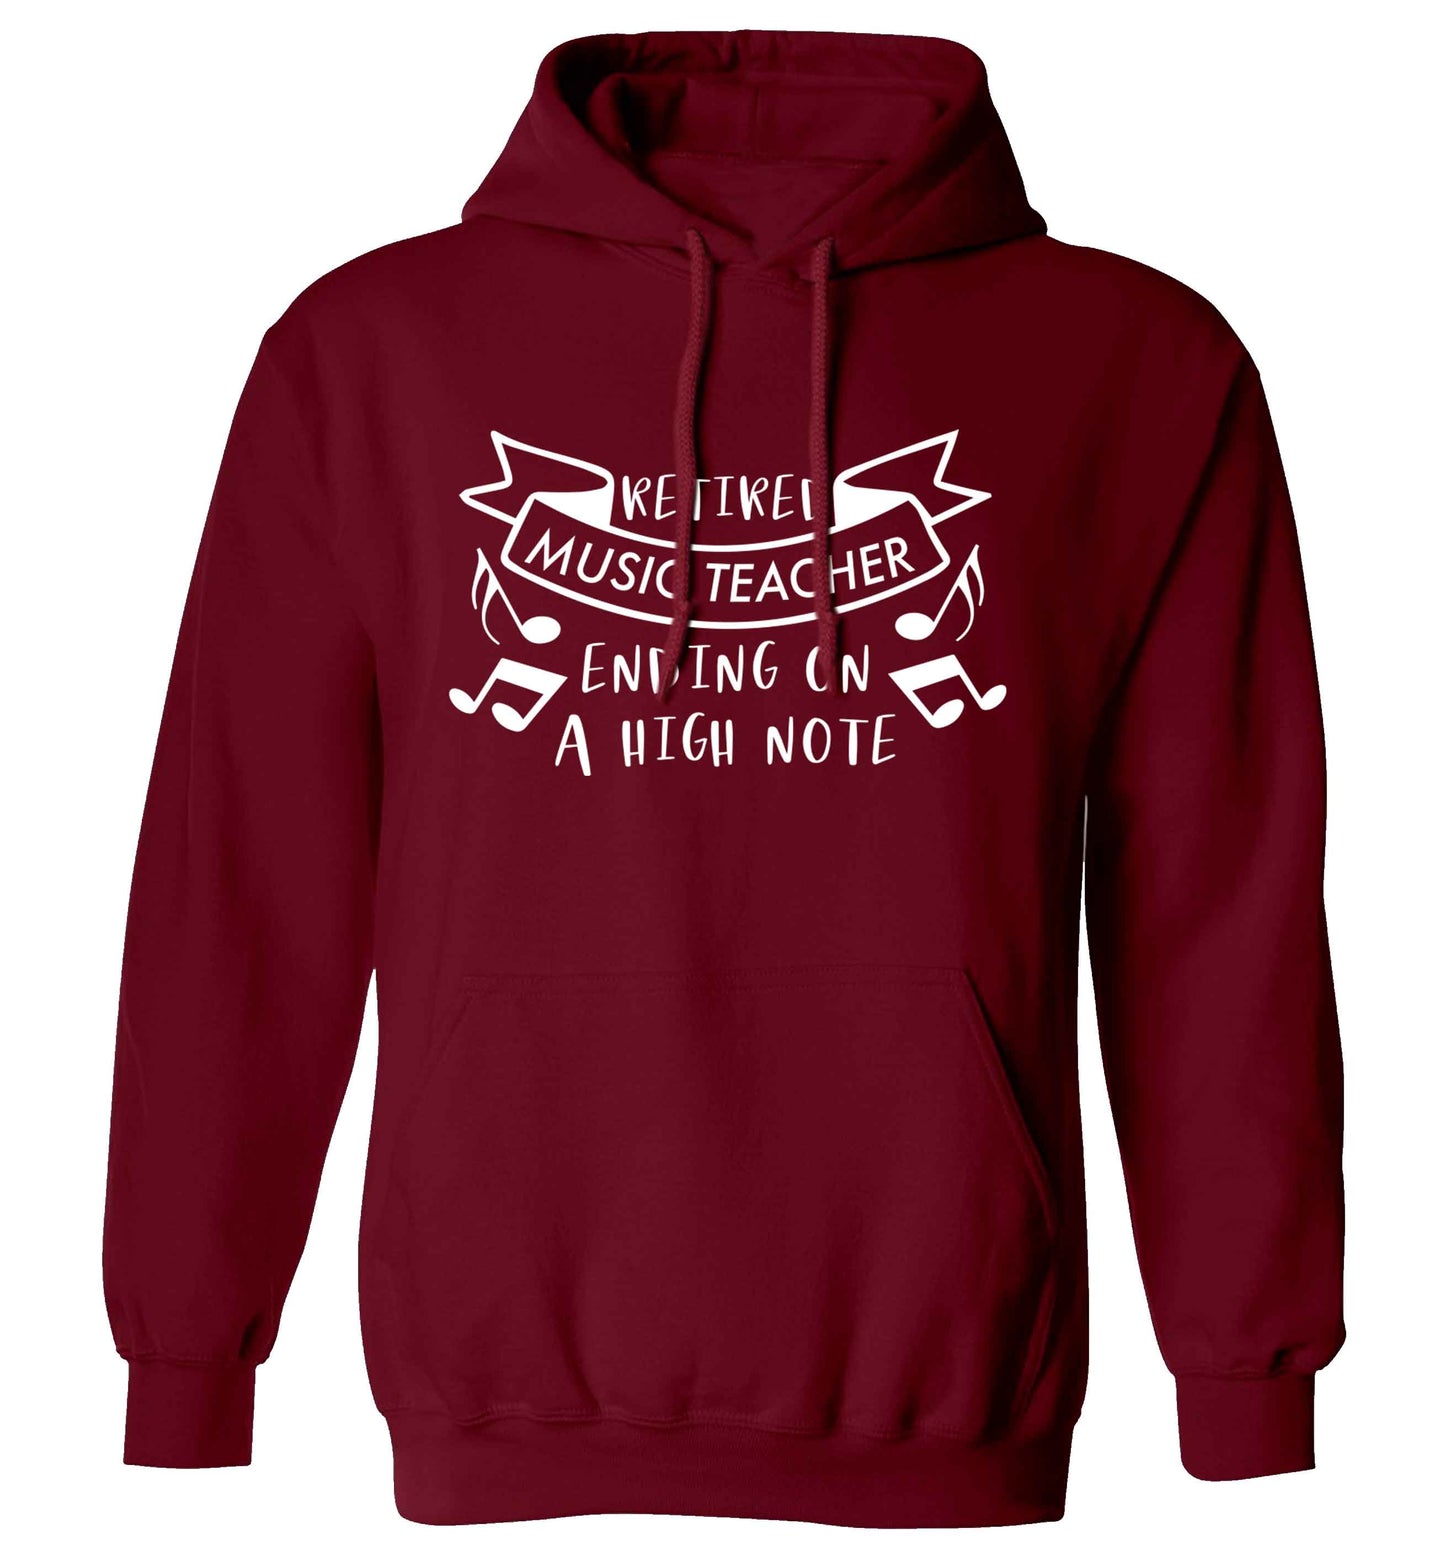 Retired music teacher ending on a high note adults unisex maroon hoodie 2XL